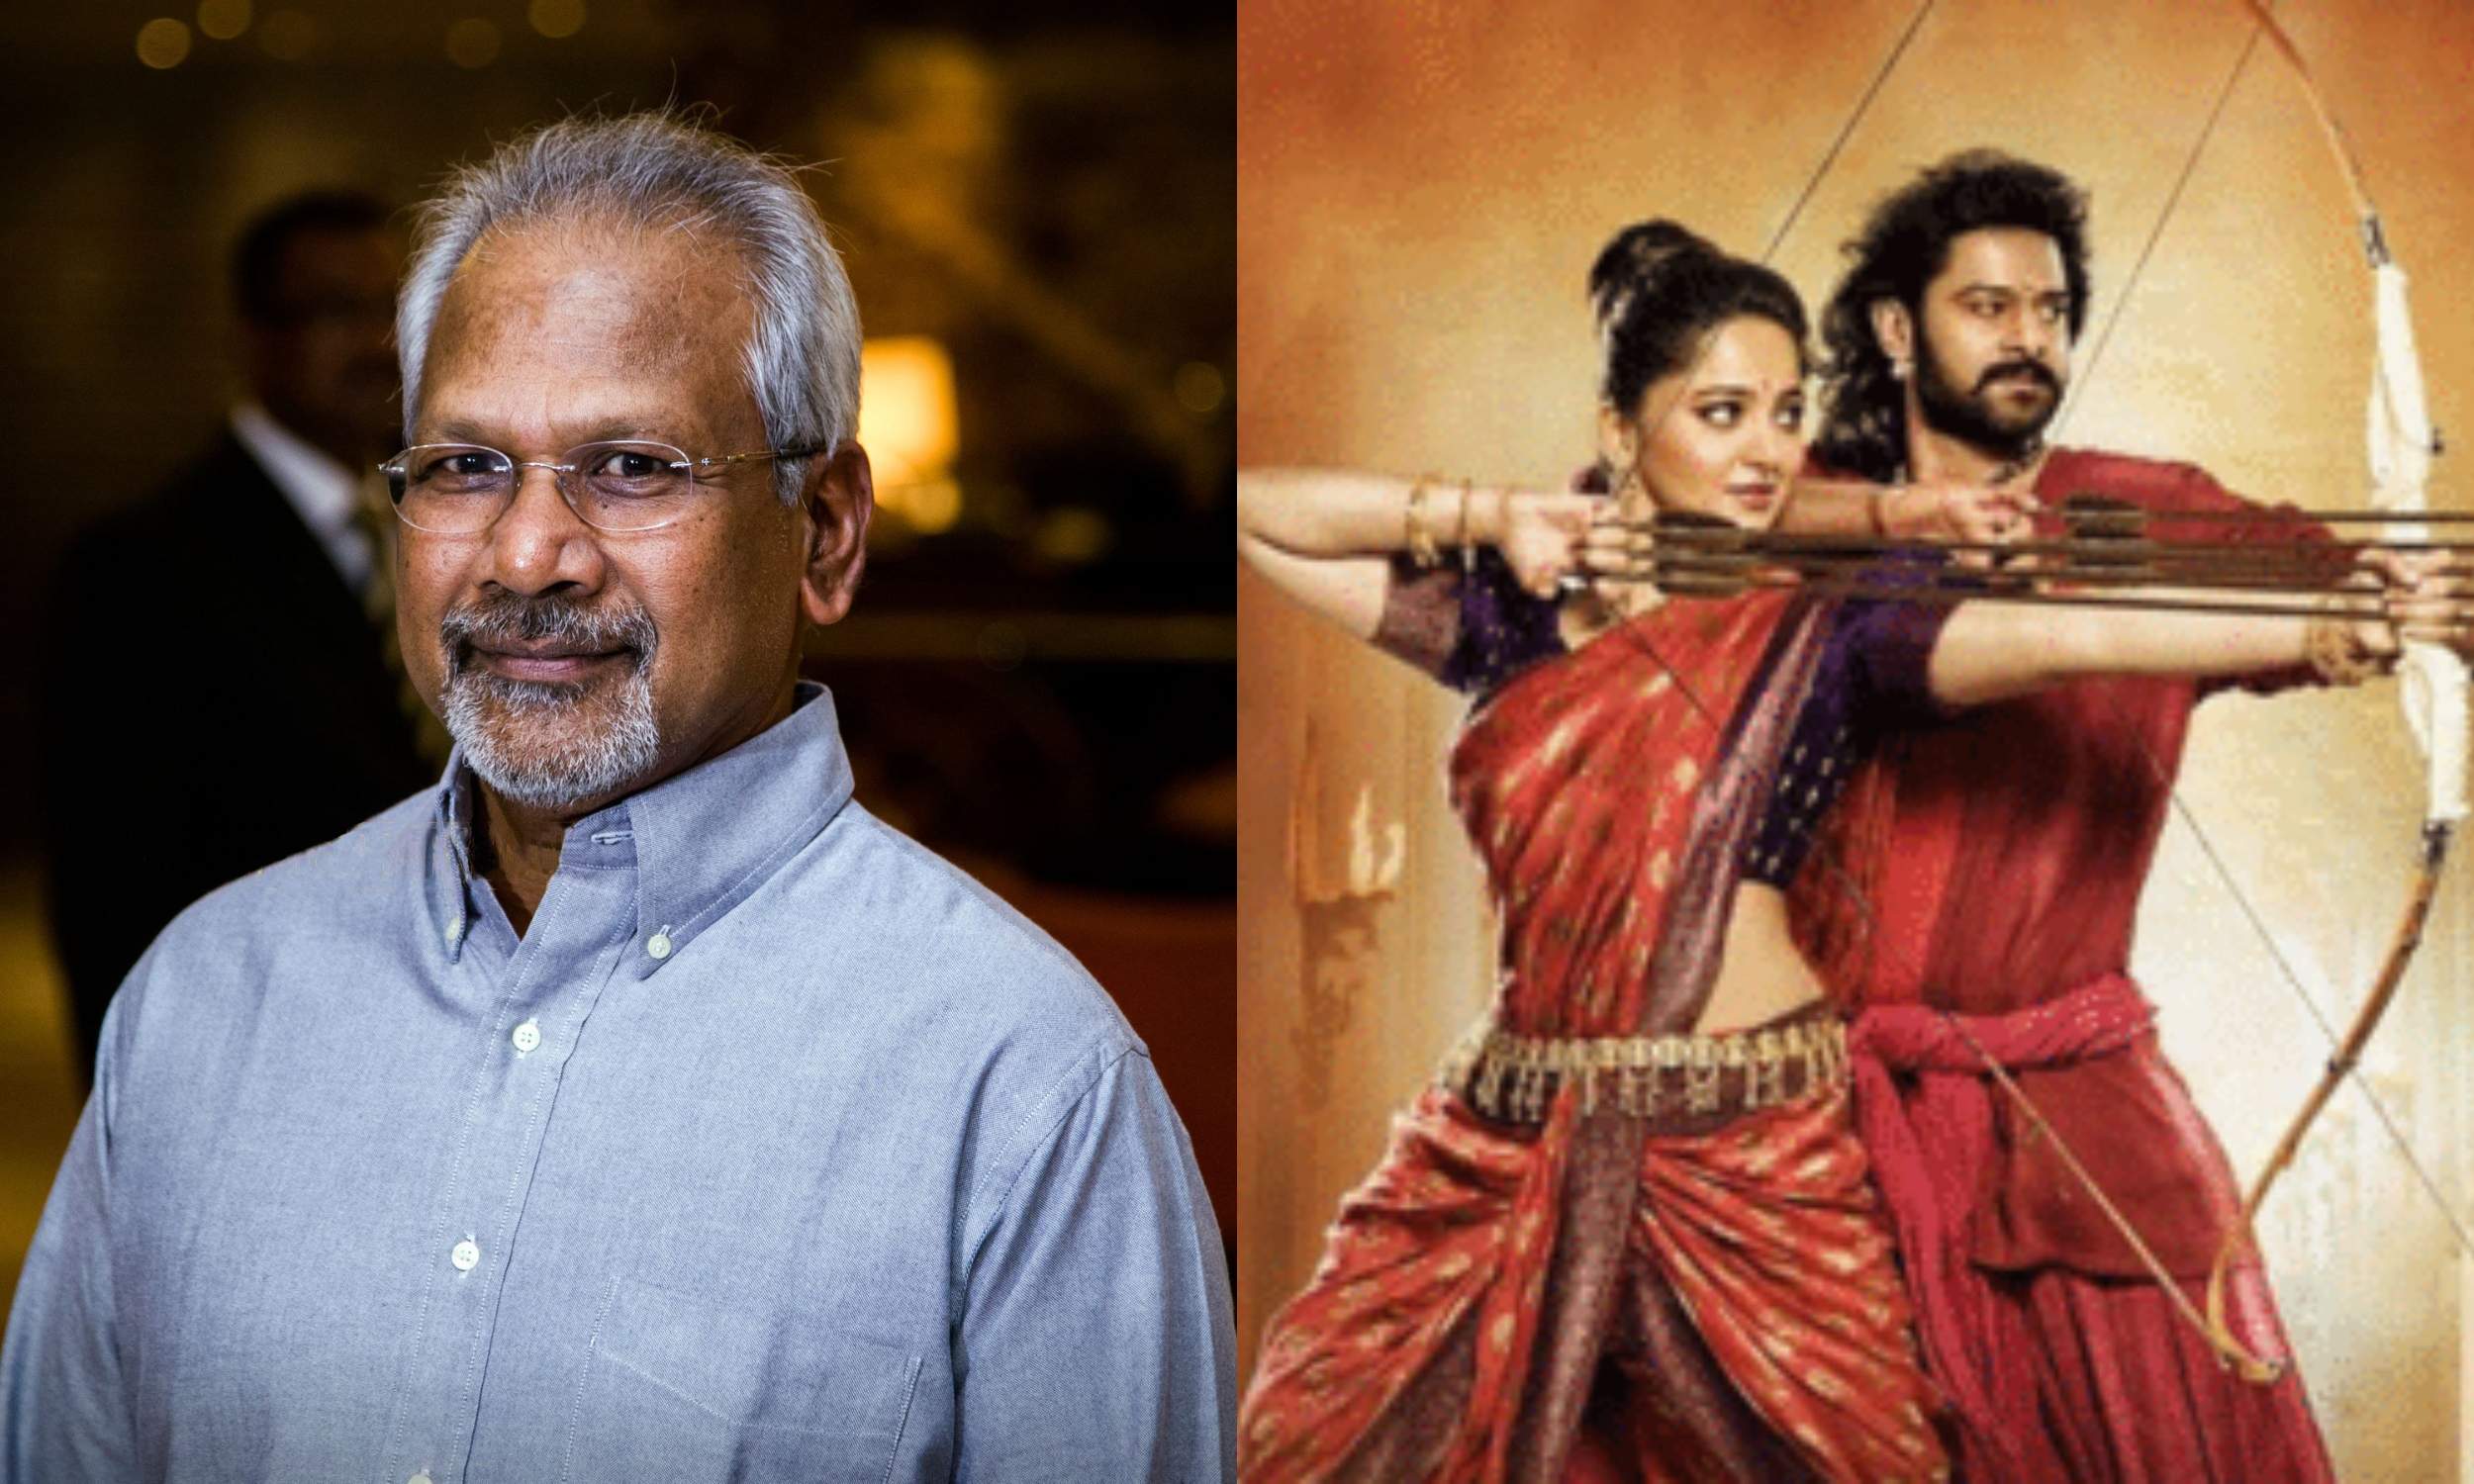 Mani Ratnam credits Baahubali as inspiration to release Ponniyin Selvan in two parts  